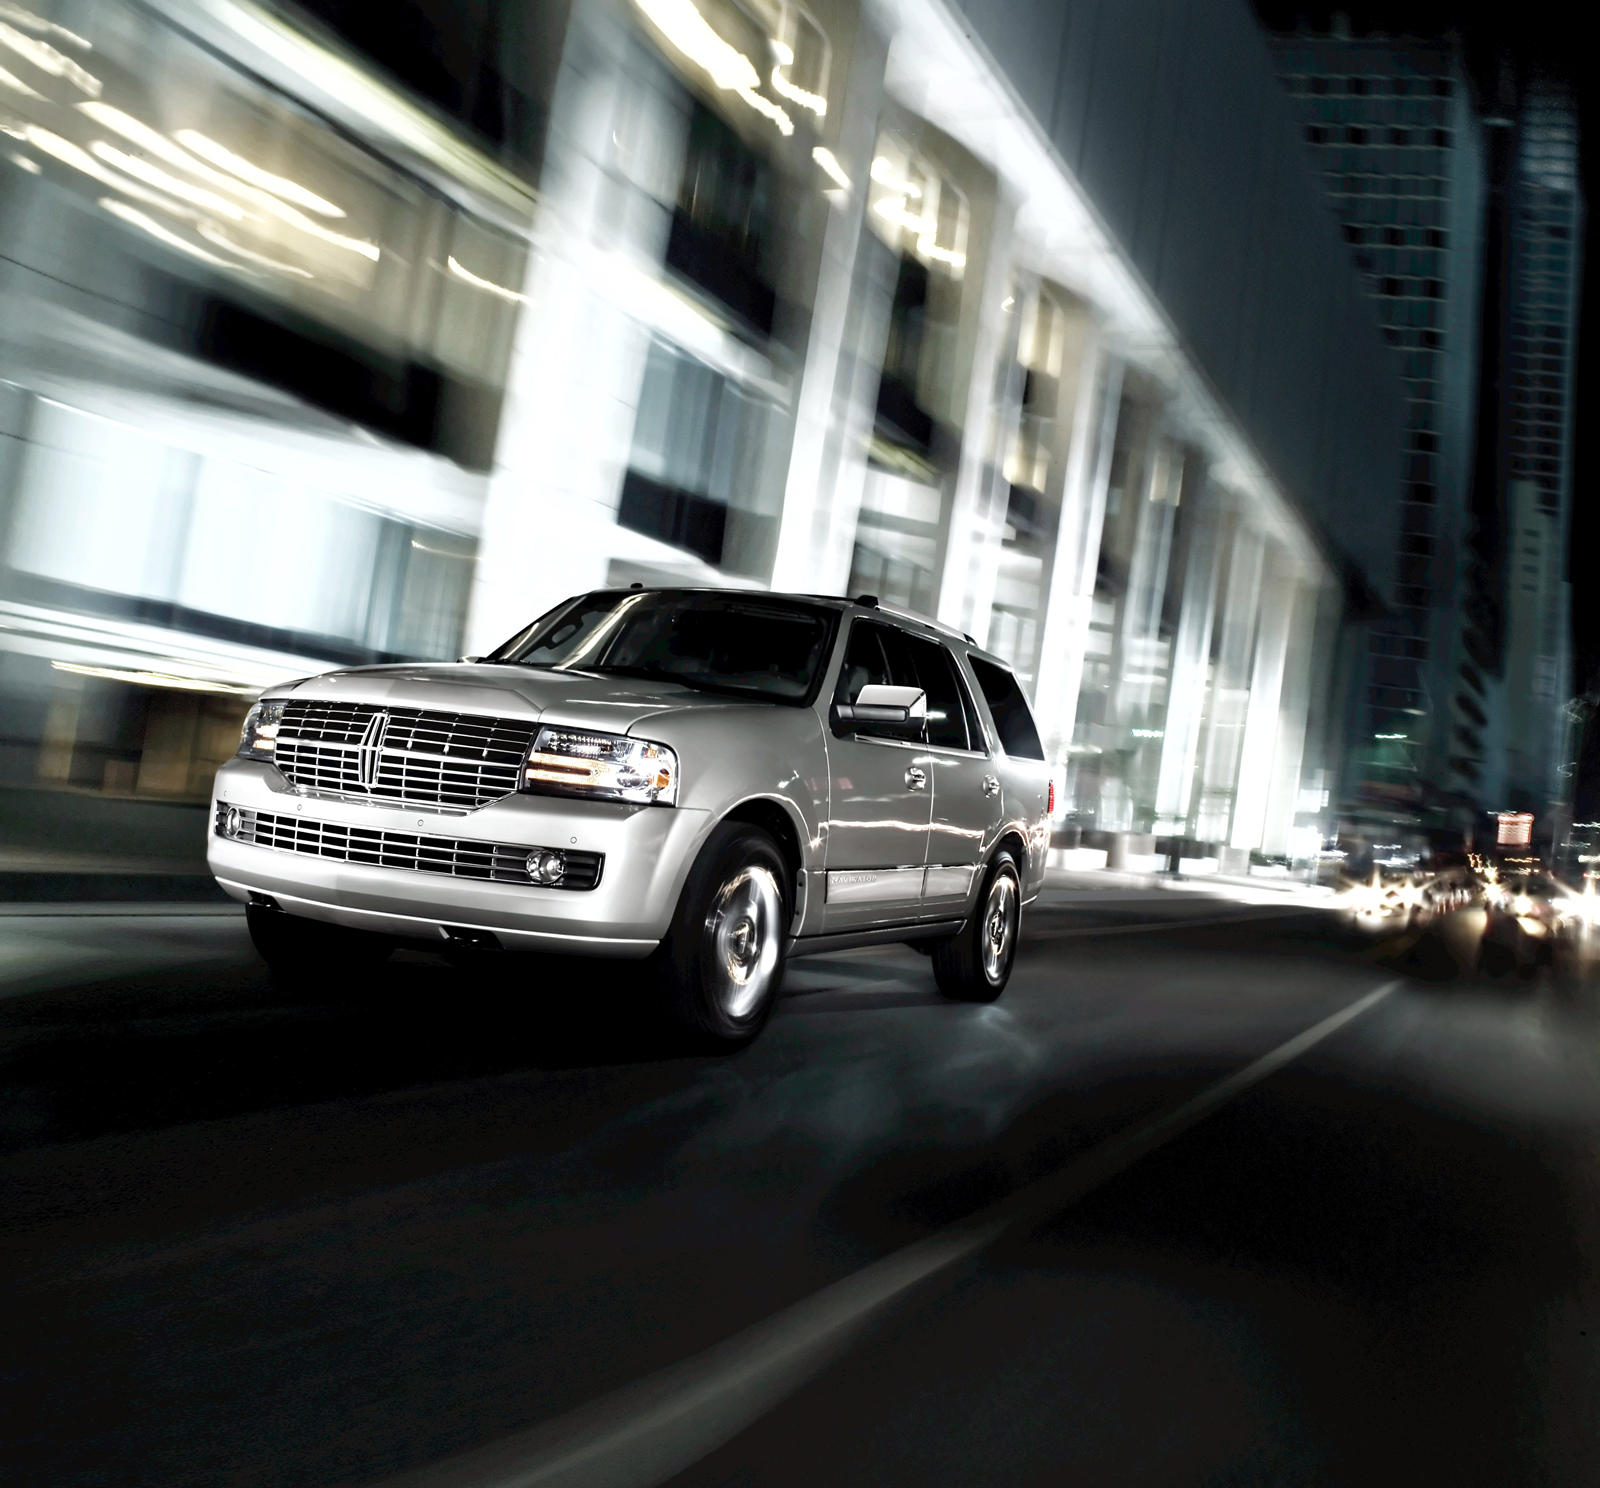 2013 Lincoln Navigator Front View Driving